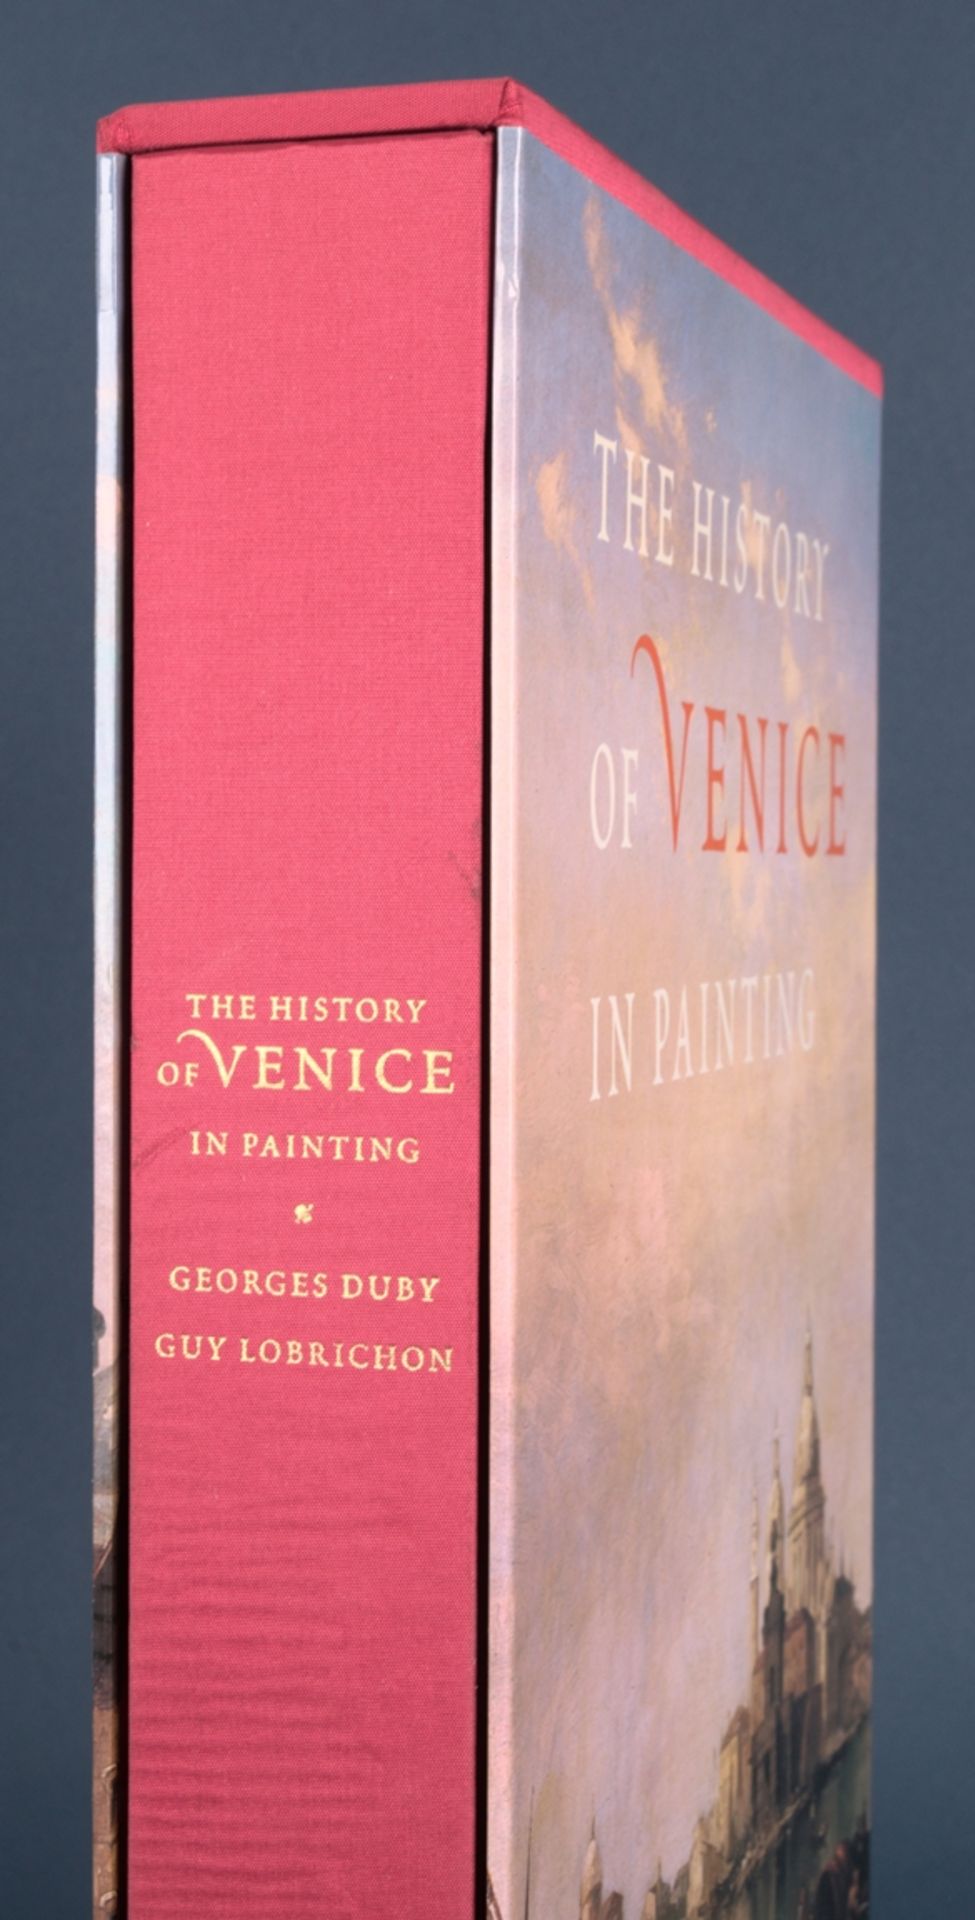 "The History of Venice in Painting", edited by Georges Duby & Guy Lobrichon, Abbeville Publishers - Bild 2 aus 8